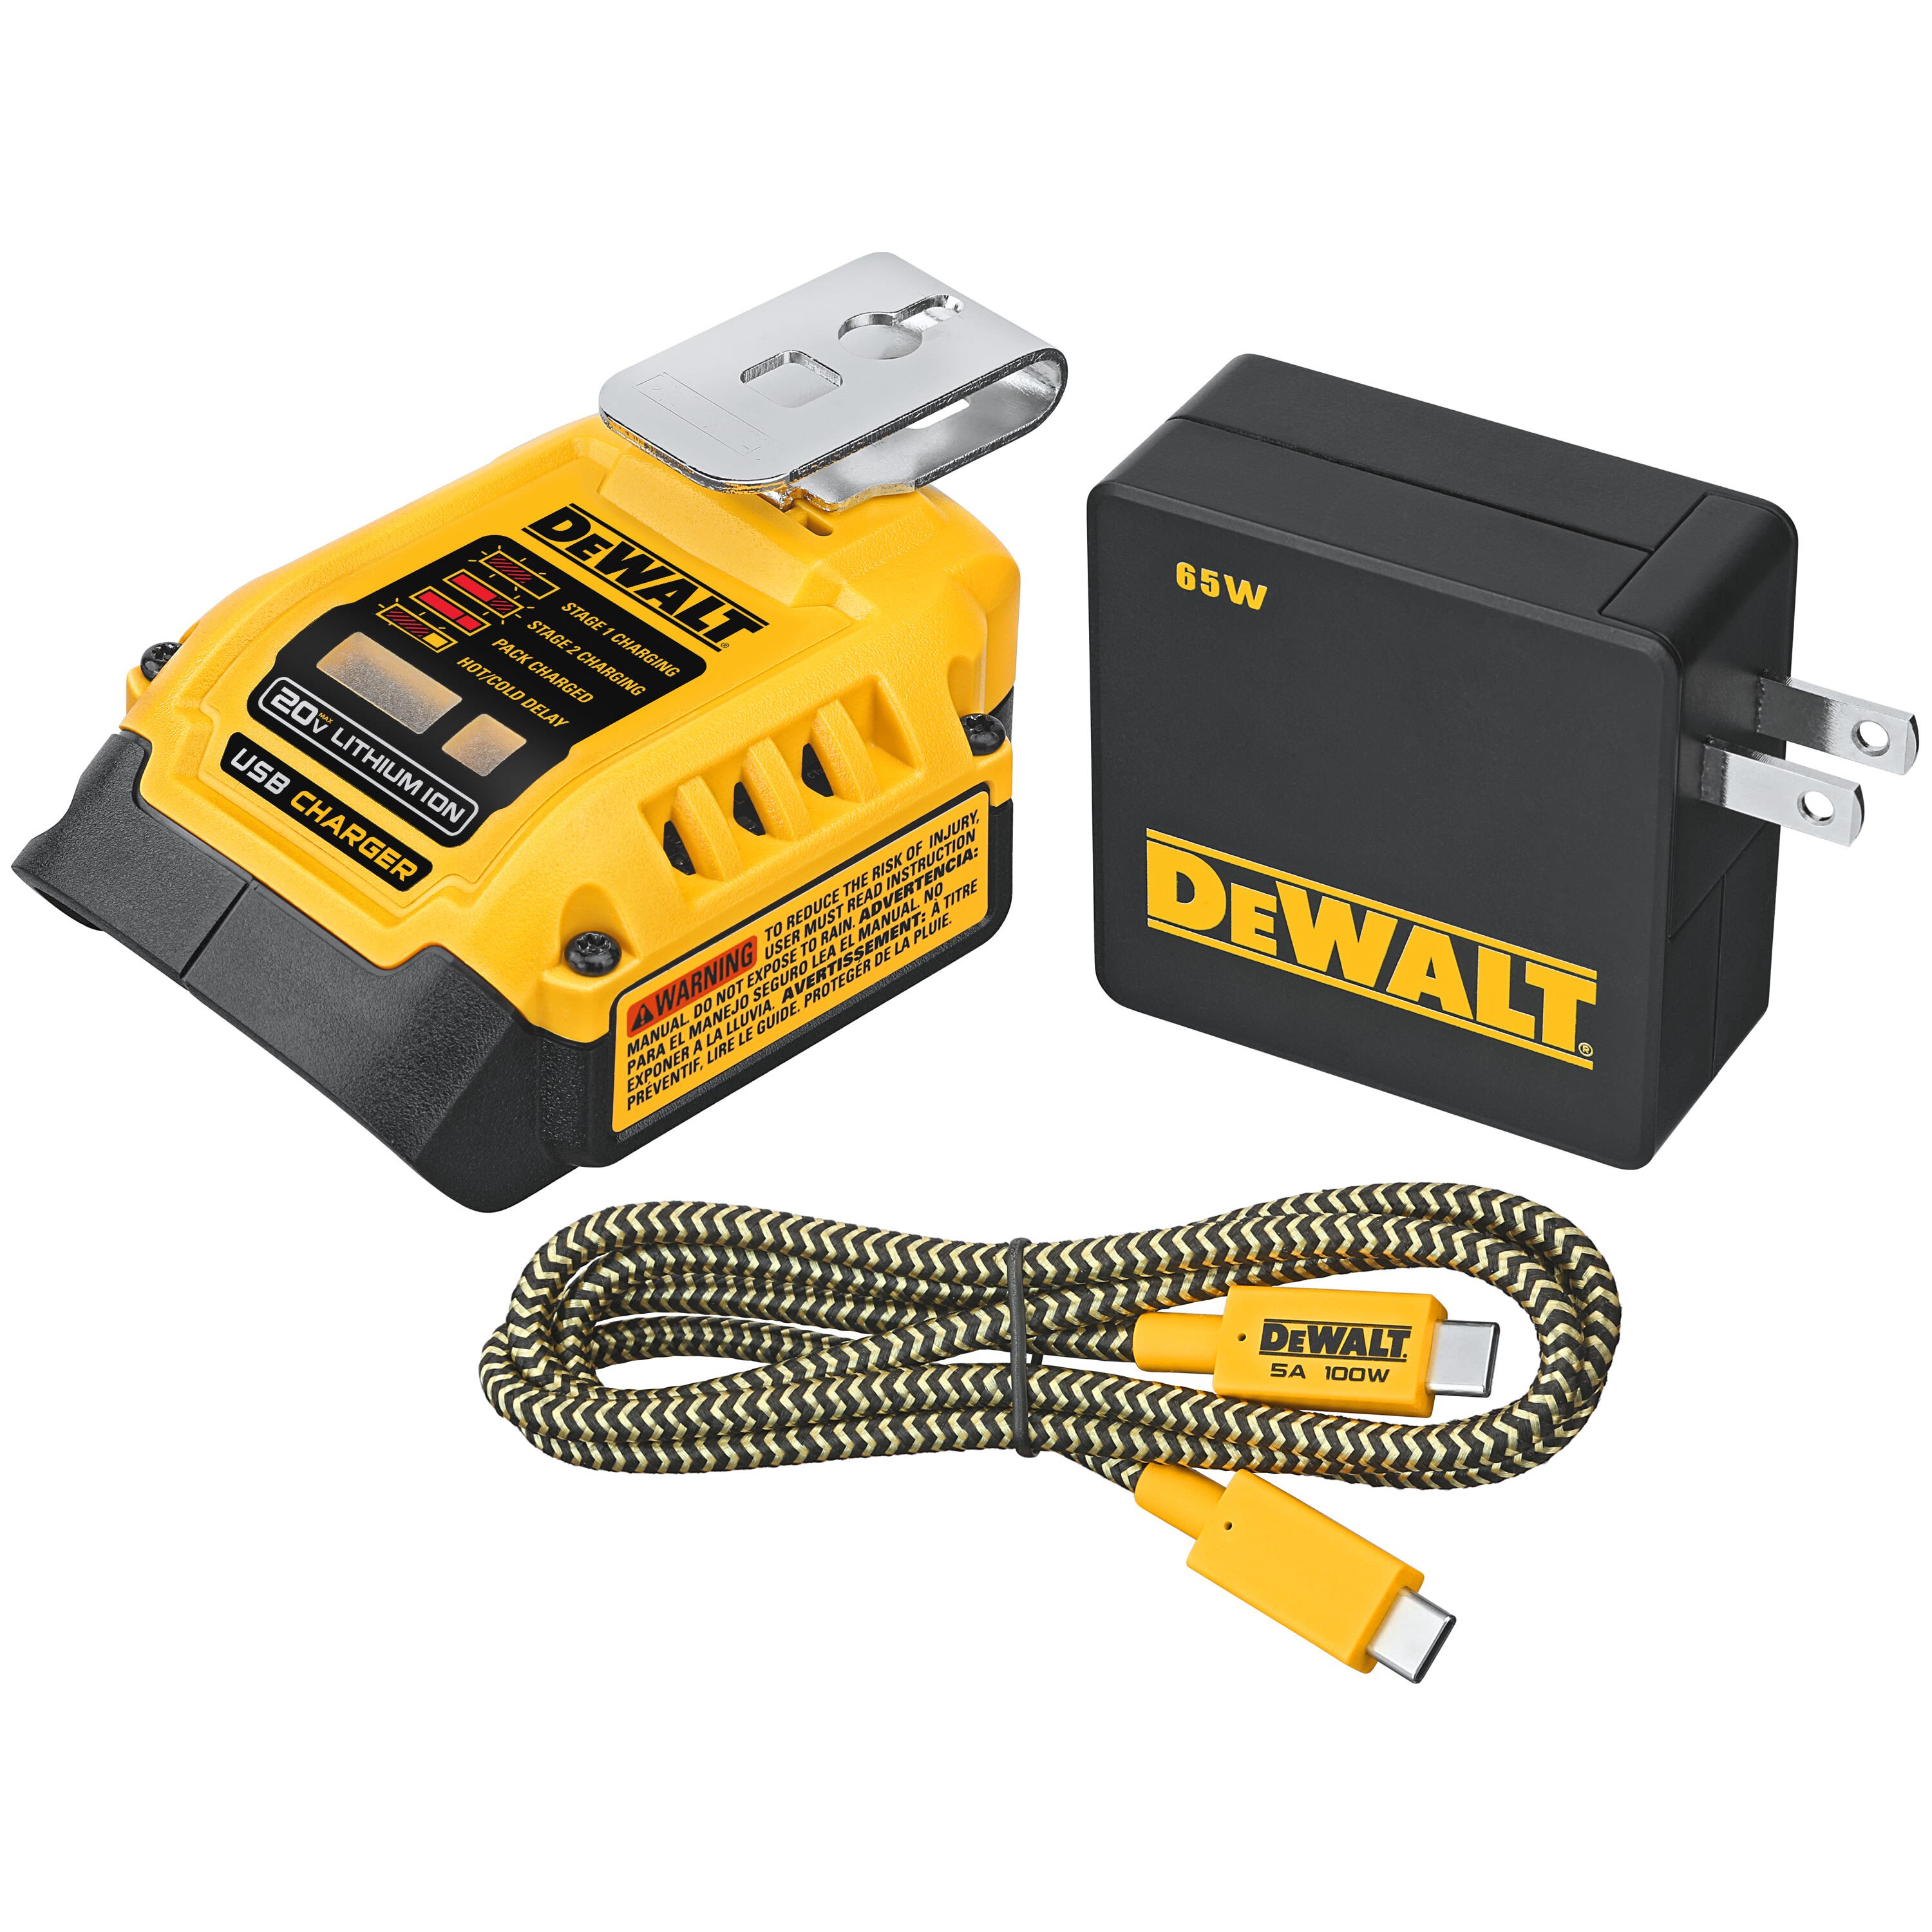 DeWALT XR Li-Ion Battery Charger For Lithium-Ion No cells, only charger Cell with EURO plug, Batteries Included